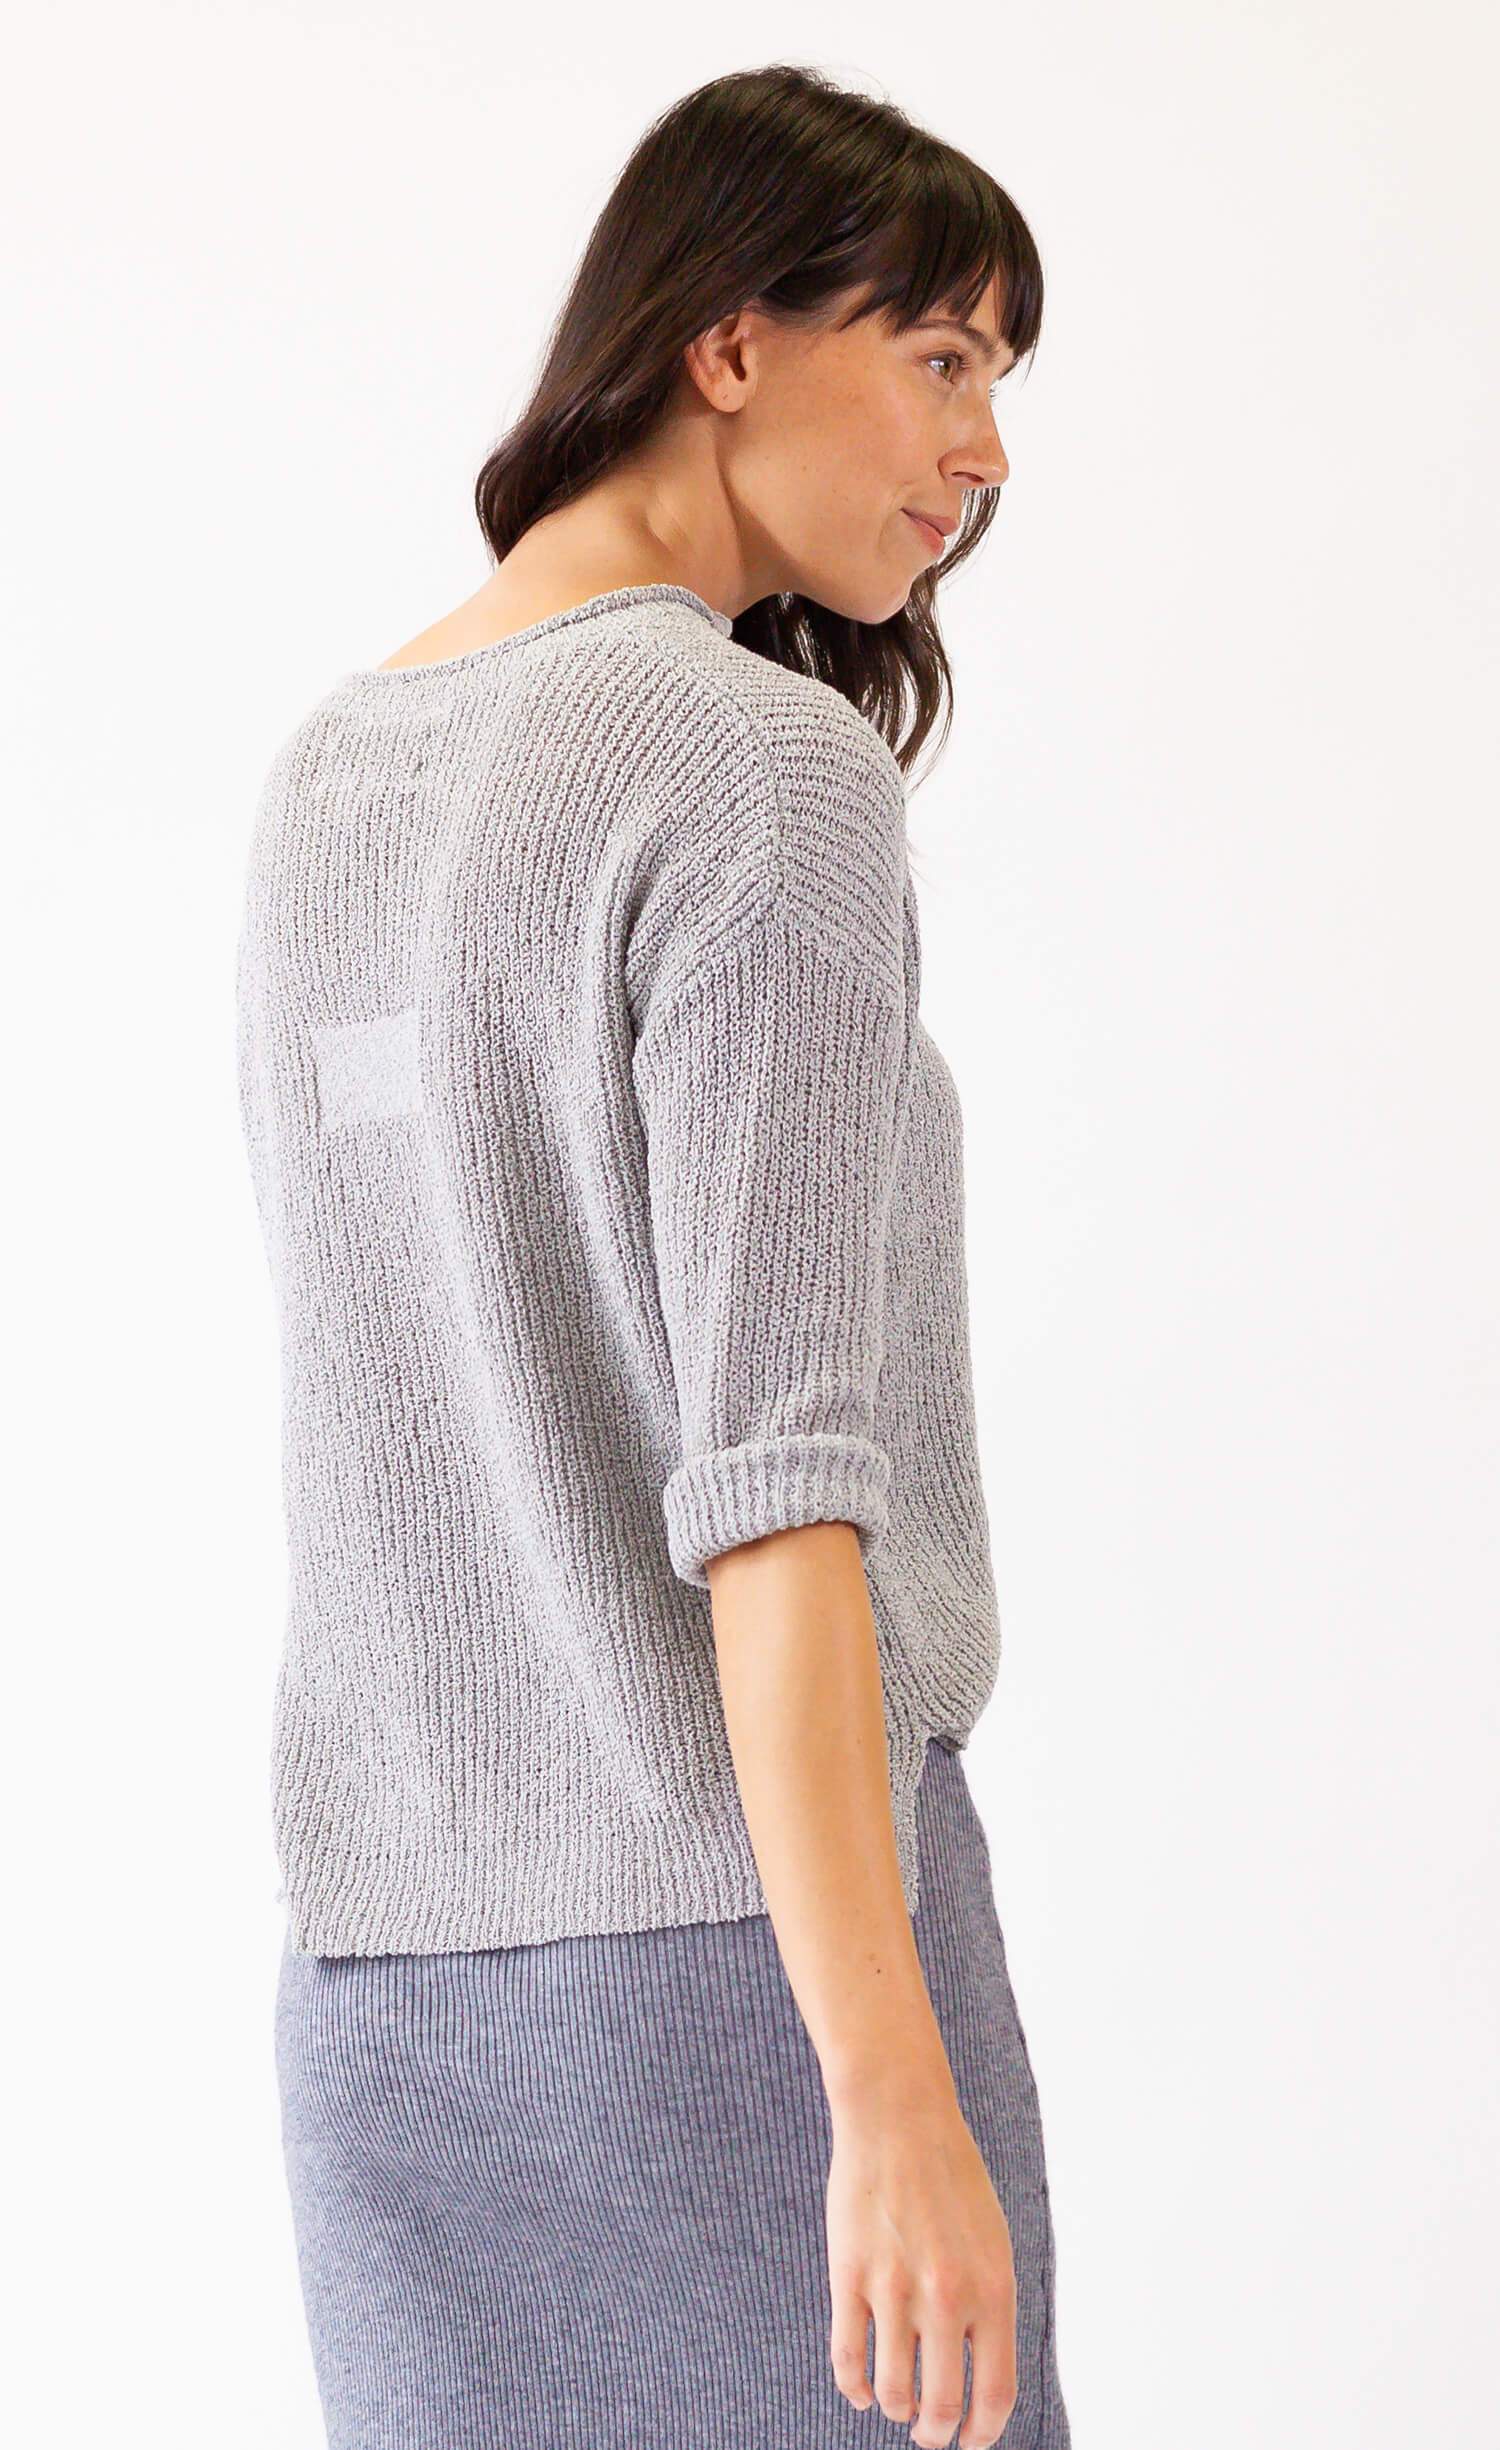 Breezy Nights Sweater - Pink Martini Collection